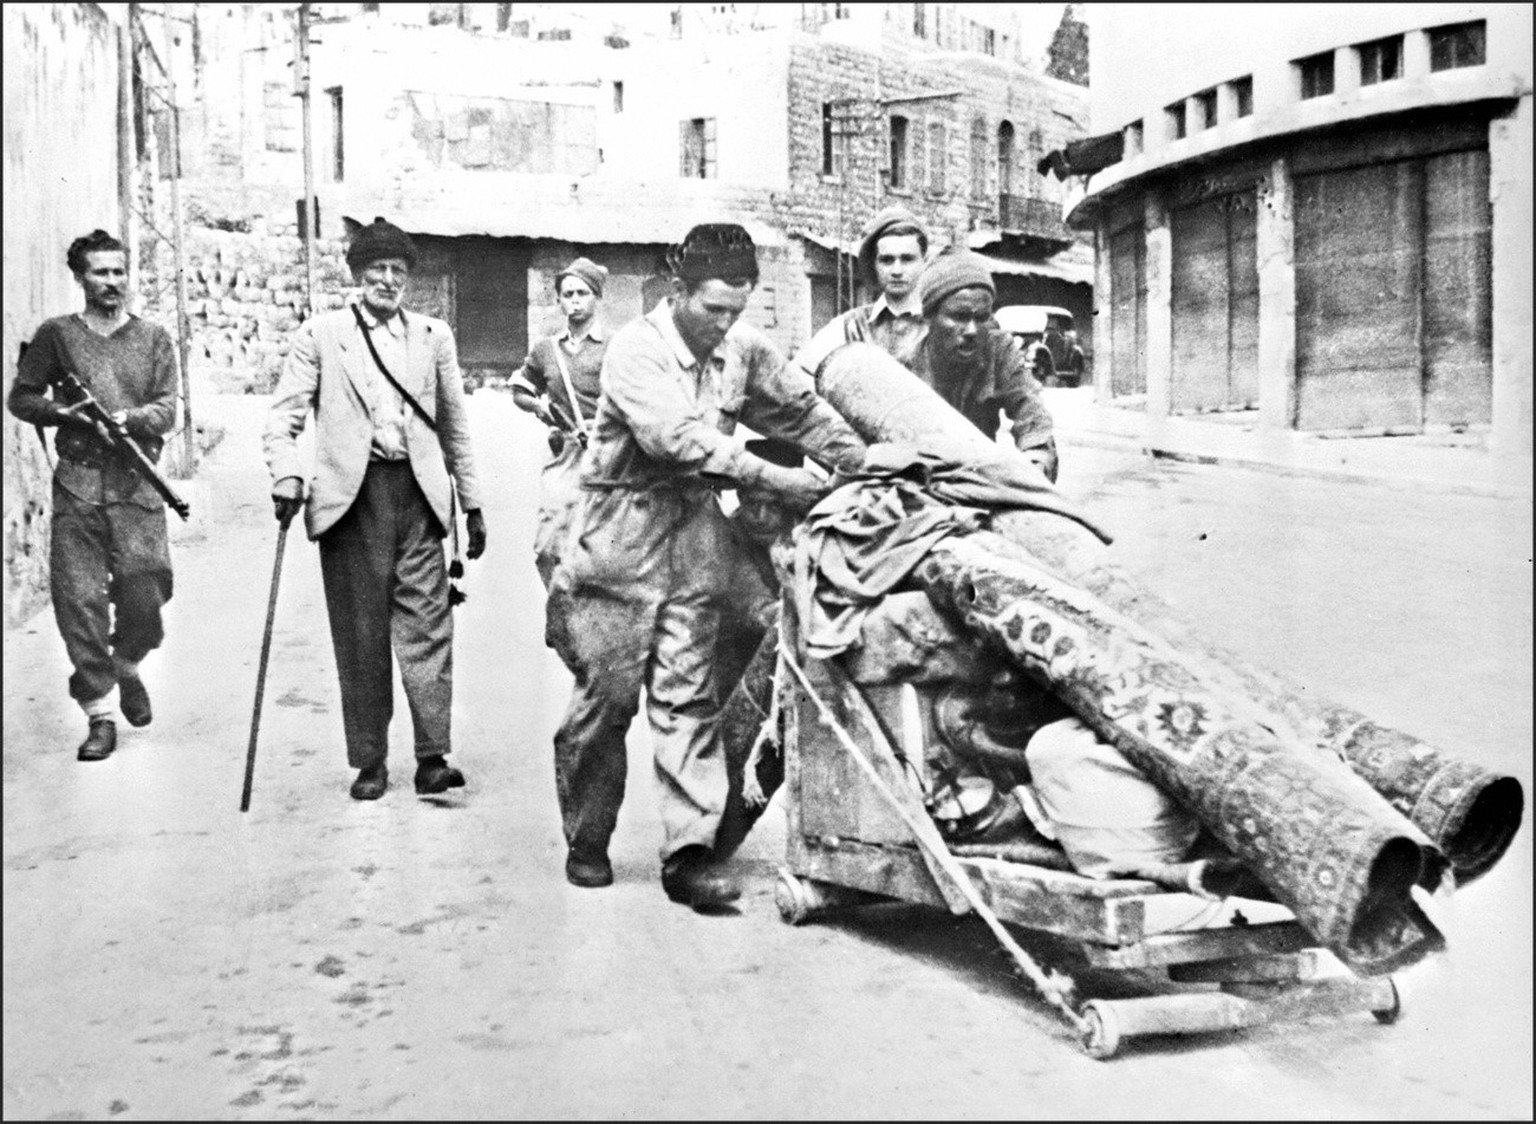 Three members of Haganah, the Jewish Agency self-defence force, escort May 12, 1948 in Haifa three Palestinian Arabs expelled from the city after the Jewish forces took over the harbor April 22, 1948. ...